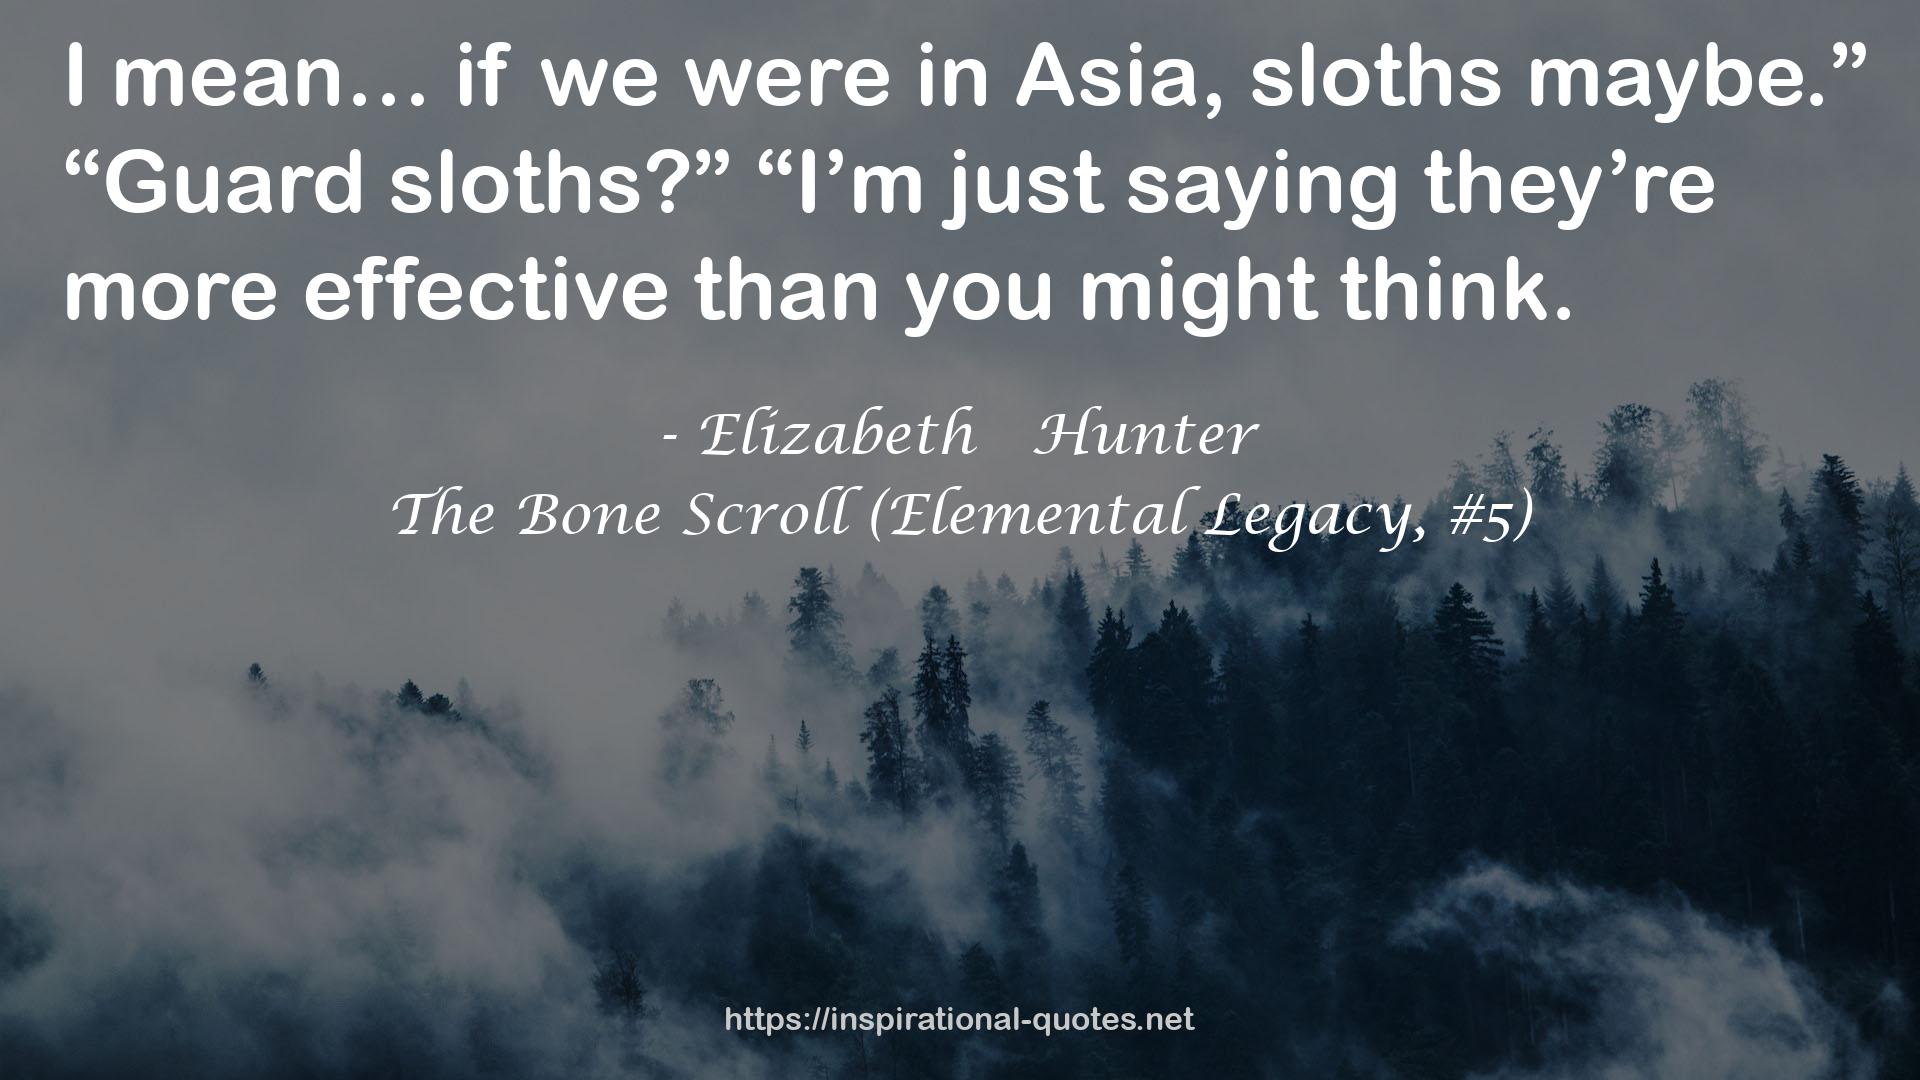 The Bone Scroll (Elemental Legacy, #5) QUOTES